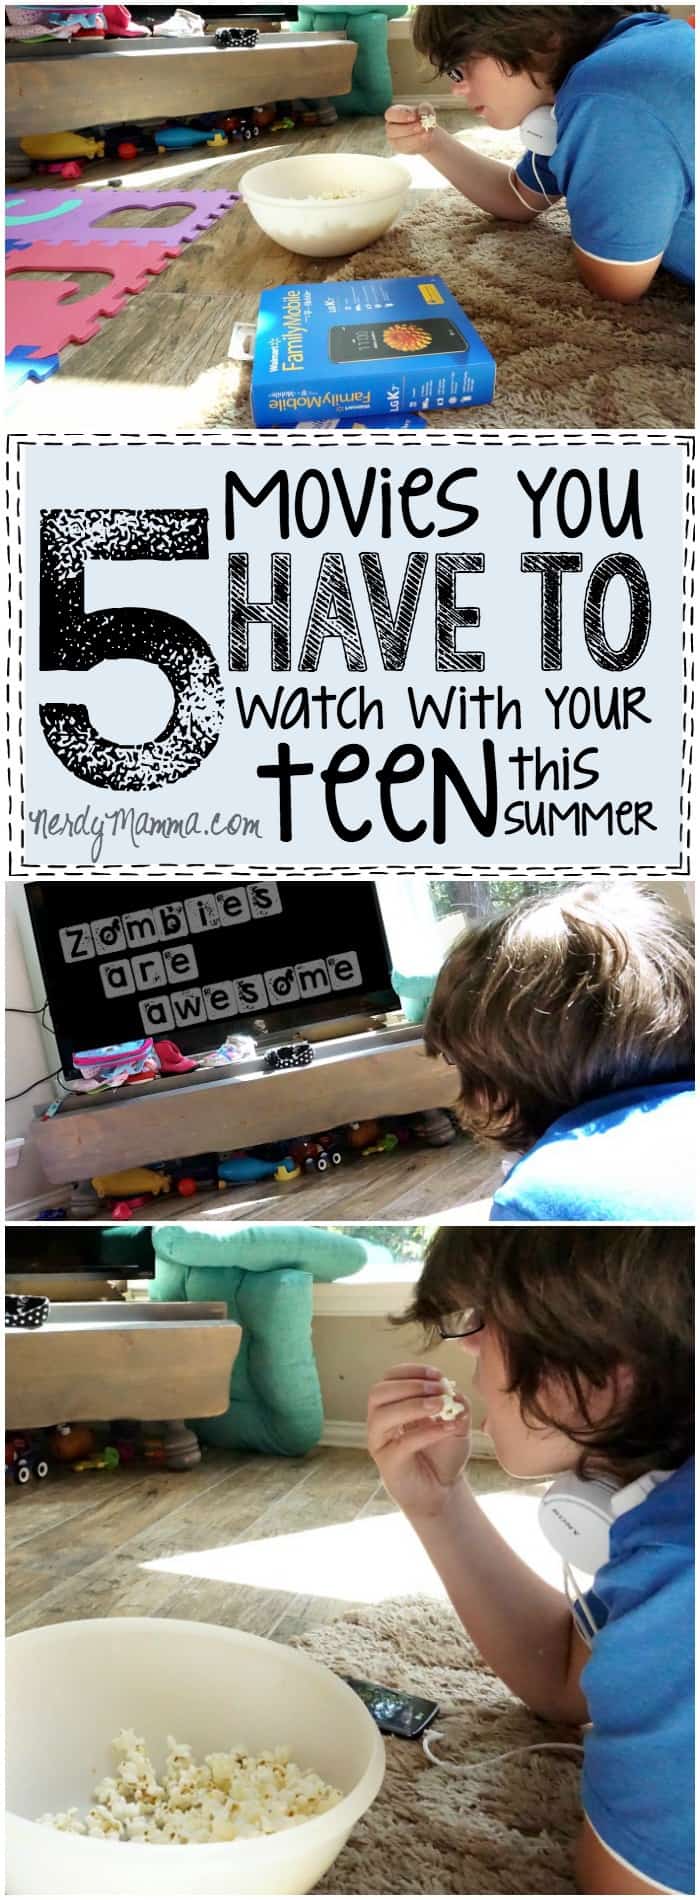 I ABSOLUTELY love these 5 movies to watch with your teen this summer. Great ideas for bonding a little! LOL!